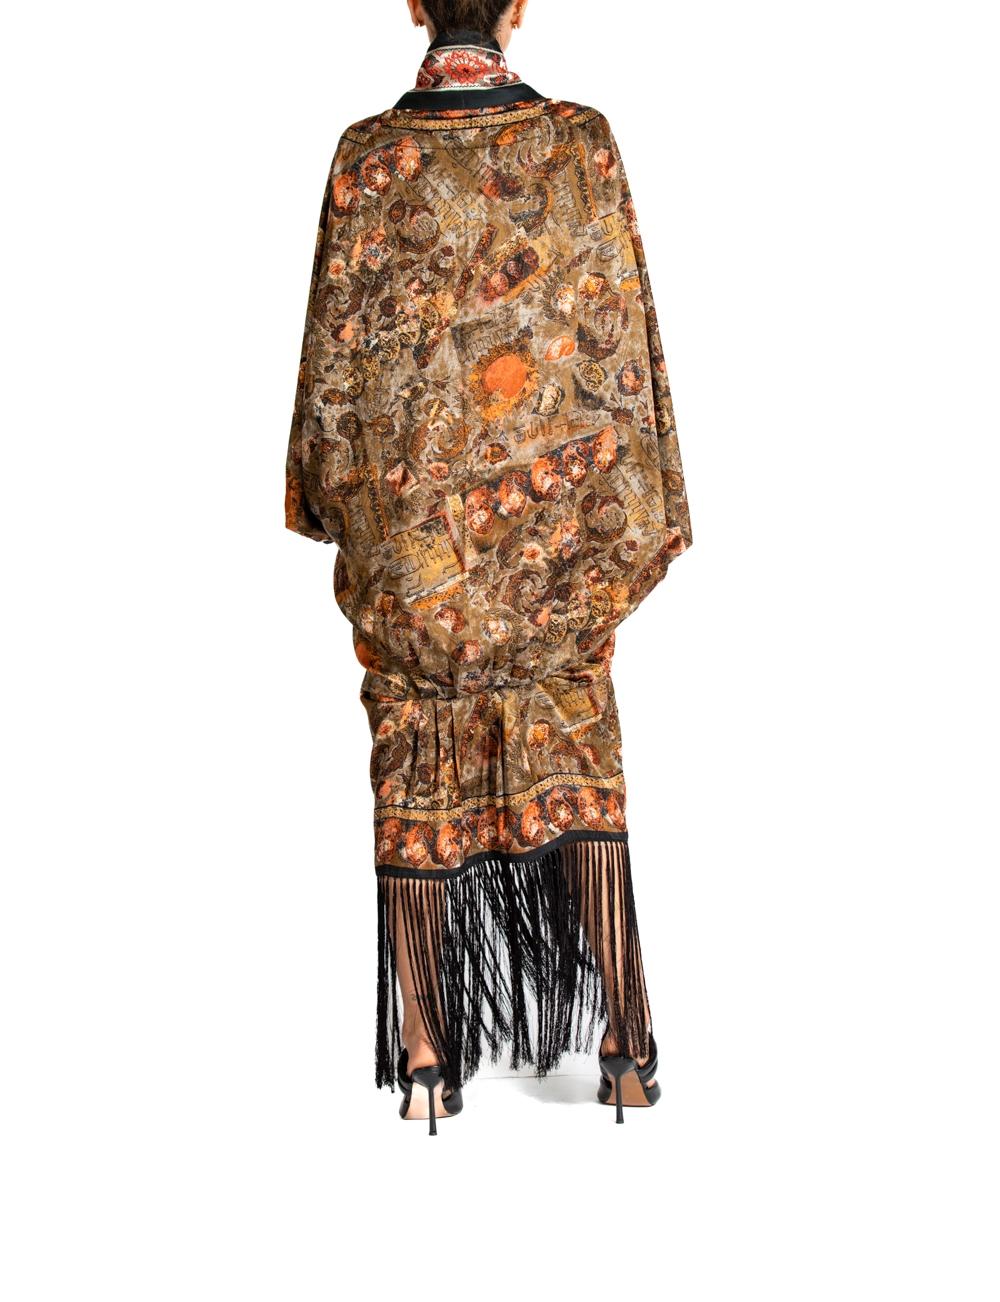 MORPHEW ATELIER Orange & Black Silk Hand Embroidered Floral Piano Shawl Cocoon 4